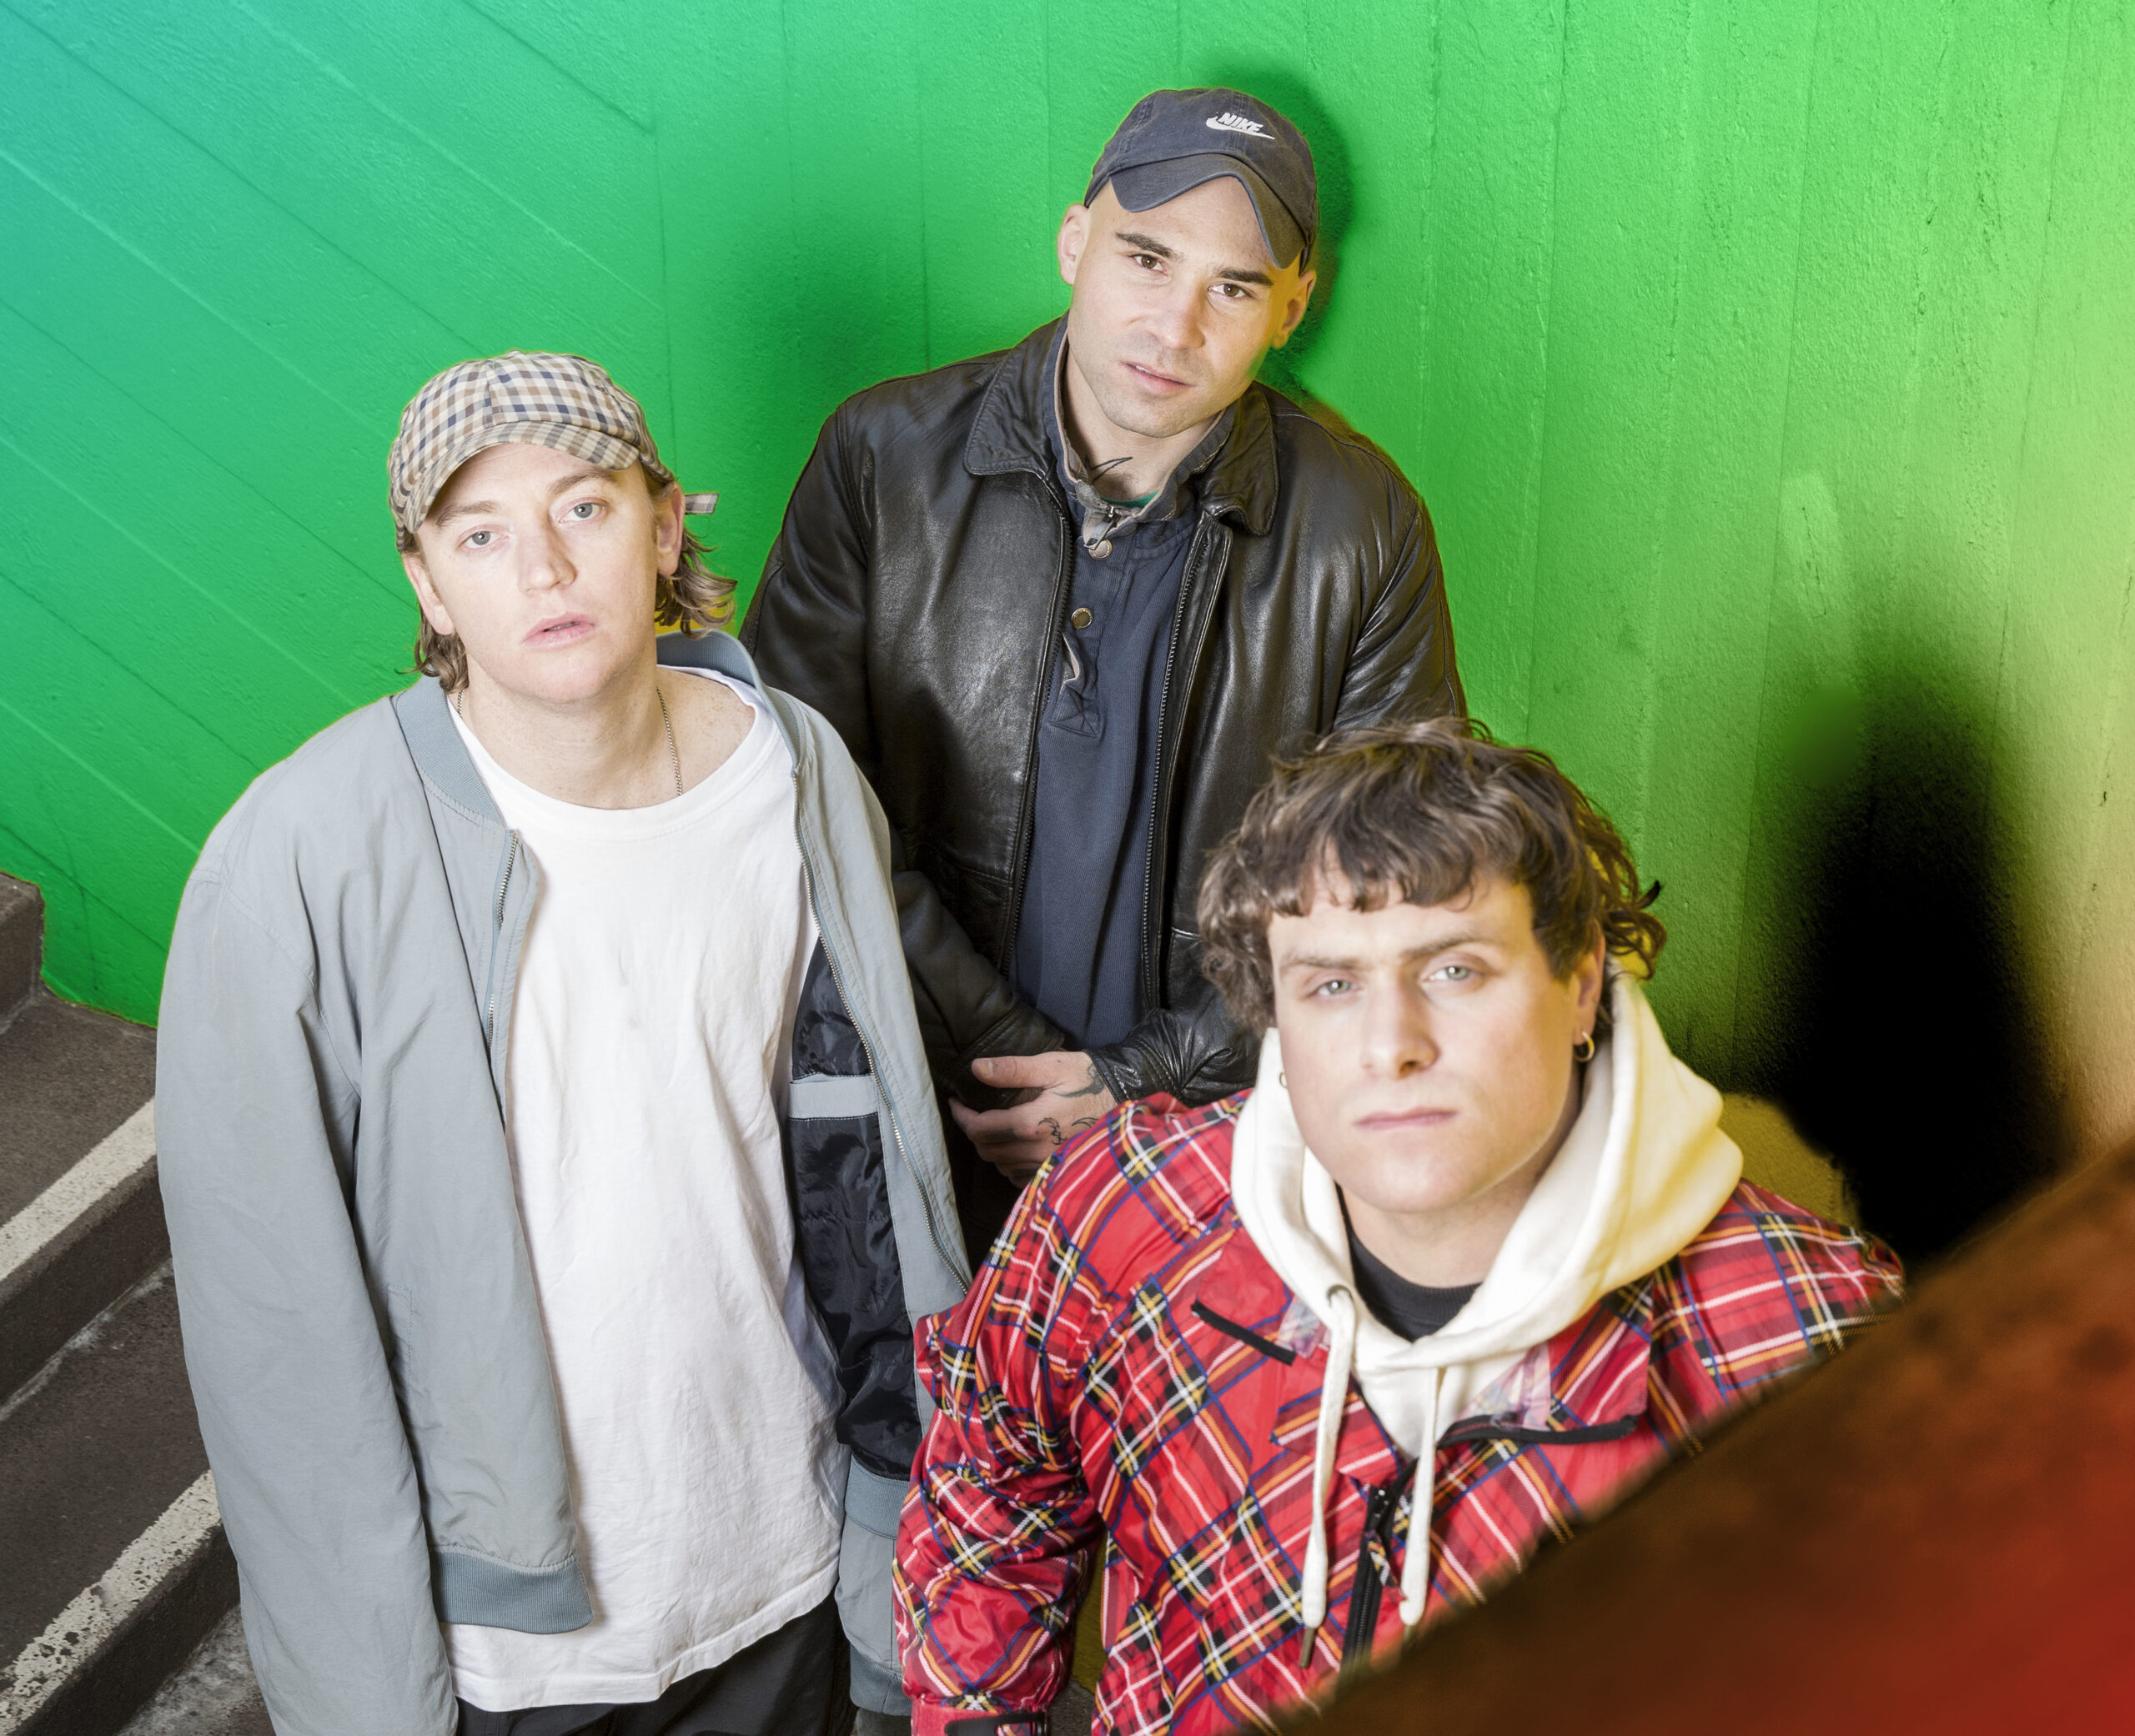 DMA’S SHARE NEW SINGLE ‘THE GLOW’, THE TITLE TRACK OFF THEIR FORTHCOMING THIRD STUDIO ALBUM